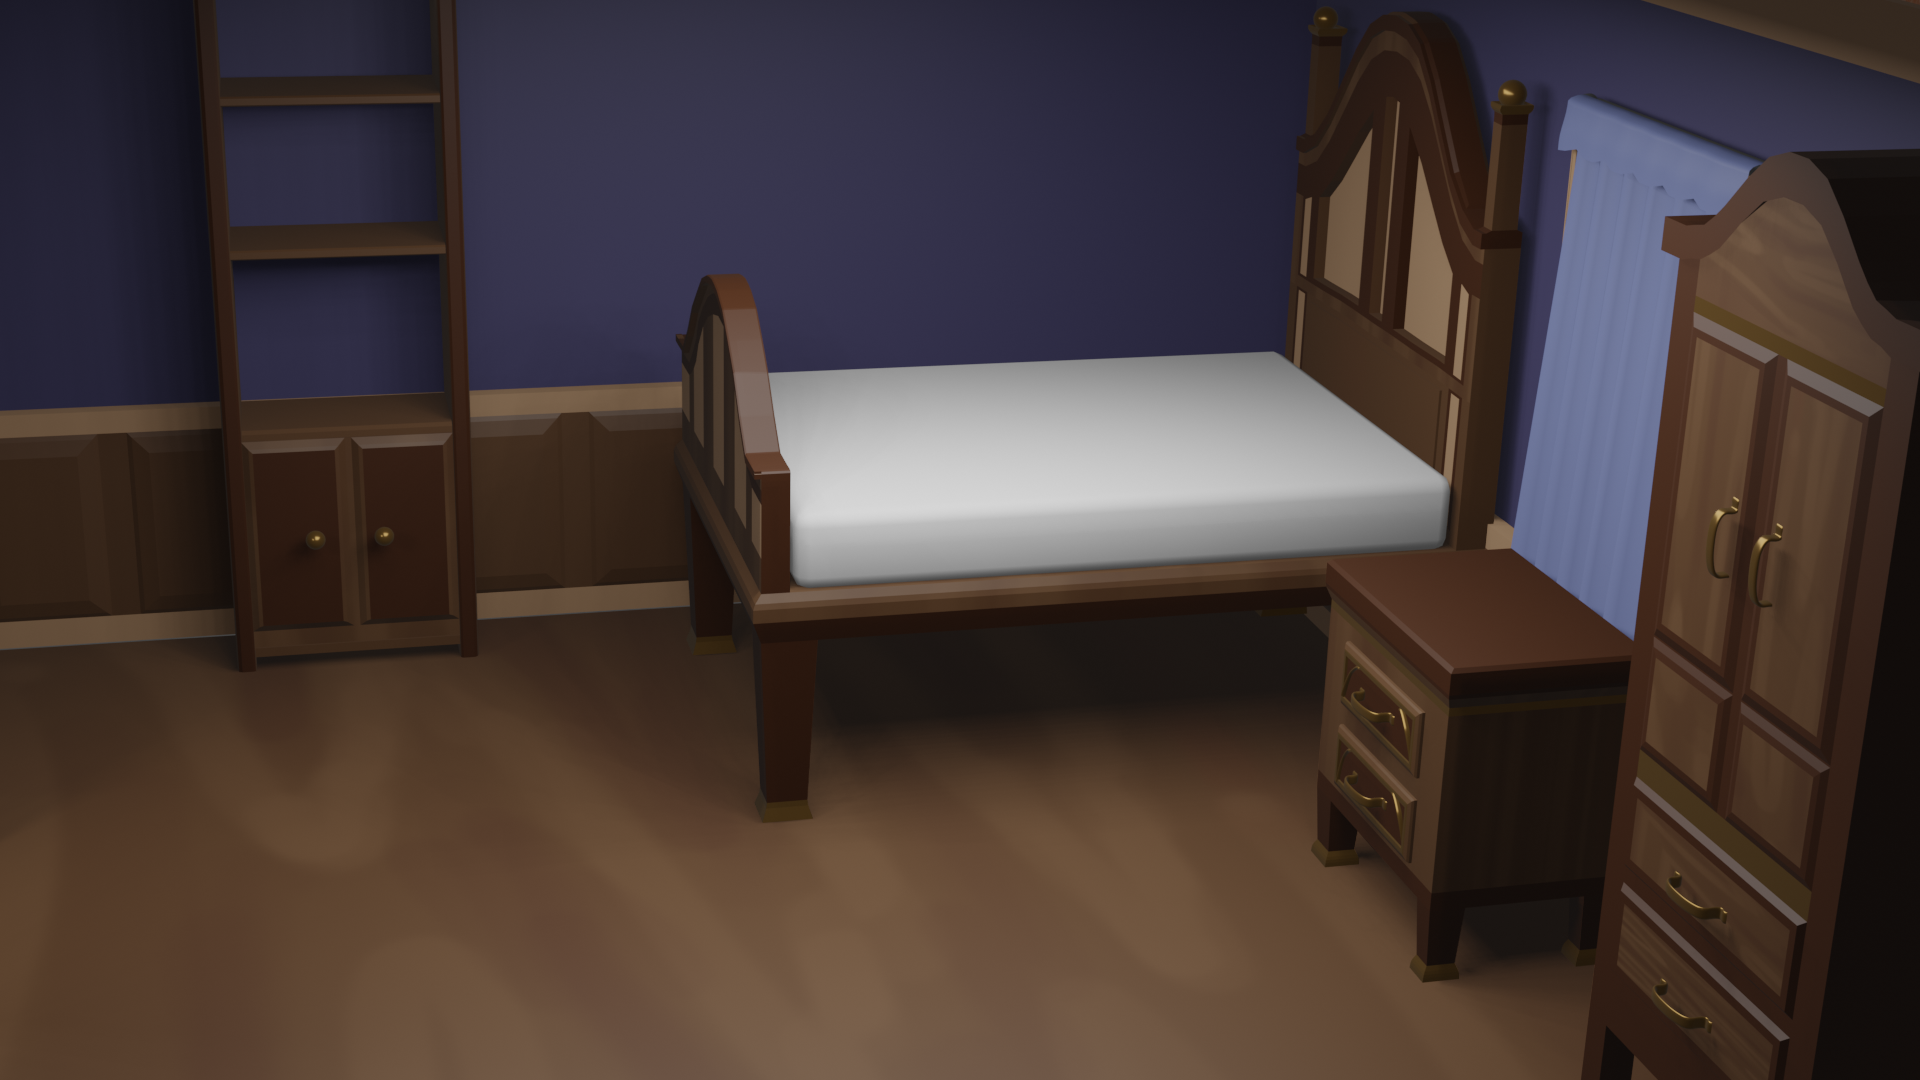 3D render of a barebones room at an isometric angle that shows a bed and bookshelf against the wall in the background while a nightstand next to the bed, and an armoire next to the nightstand are closer to the camera